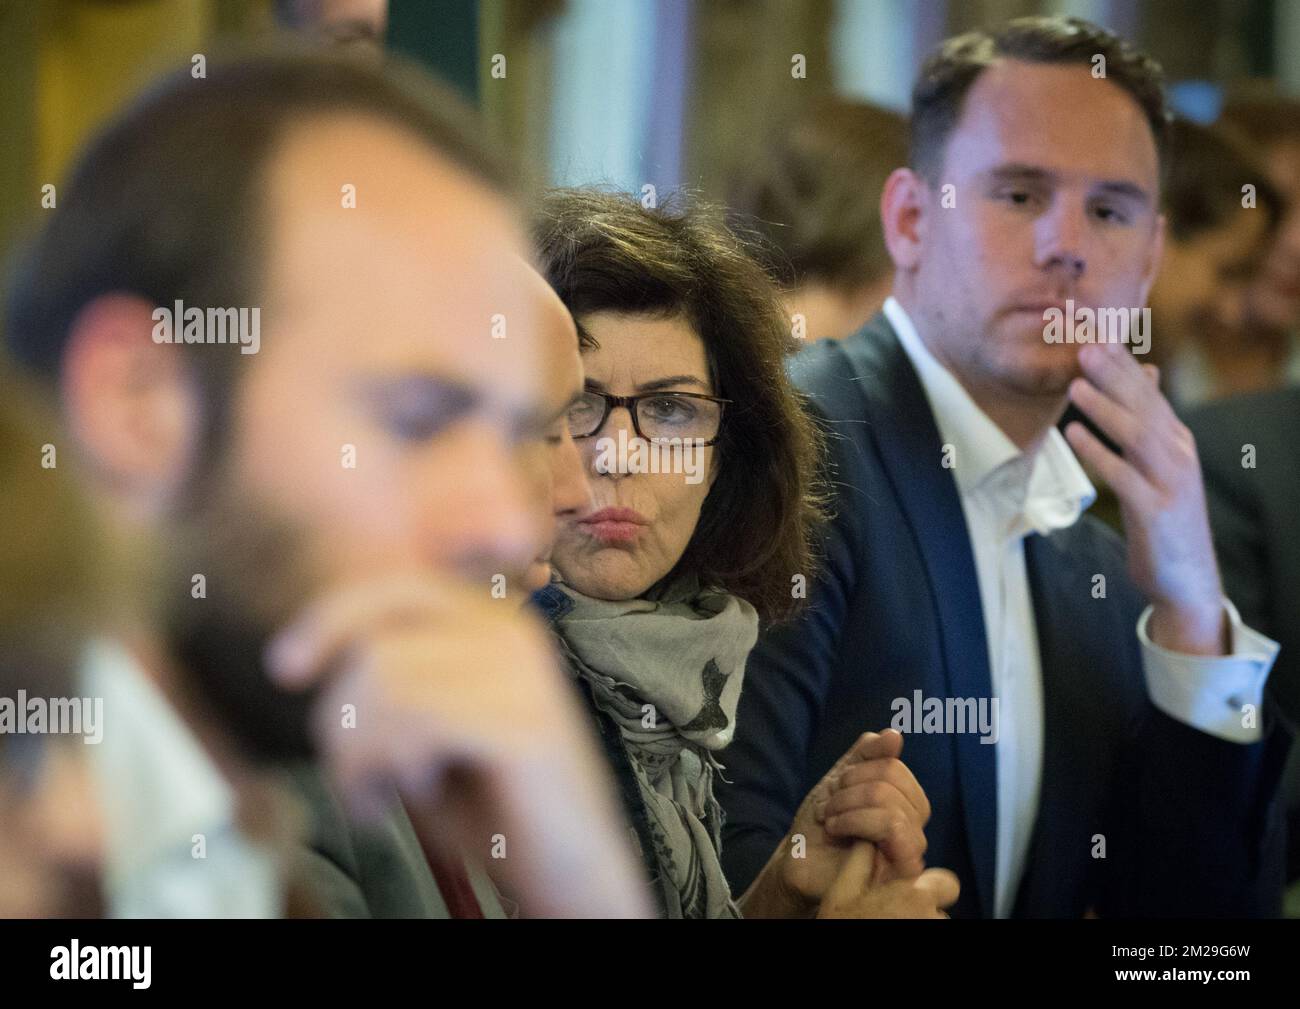 Joelle Milquet and David Weytsman pictured during a meeting of the city council of Brussels, in Brussels city hall, Monday 11 September 2017.This is the first council with new mayor. BELGA PHOTO BENOIT DOPPAGNE Stock Photo